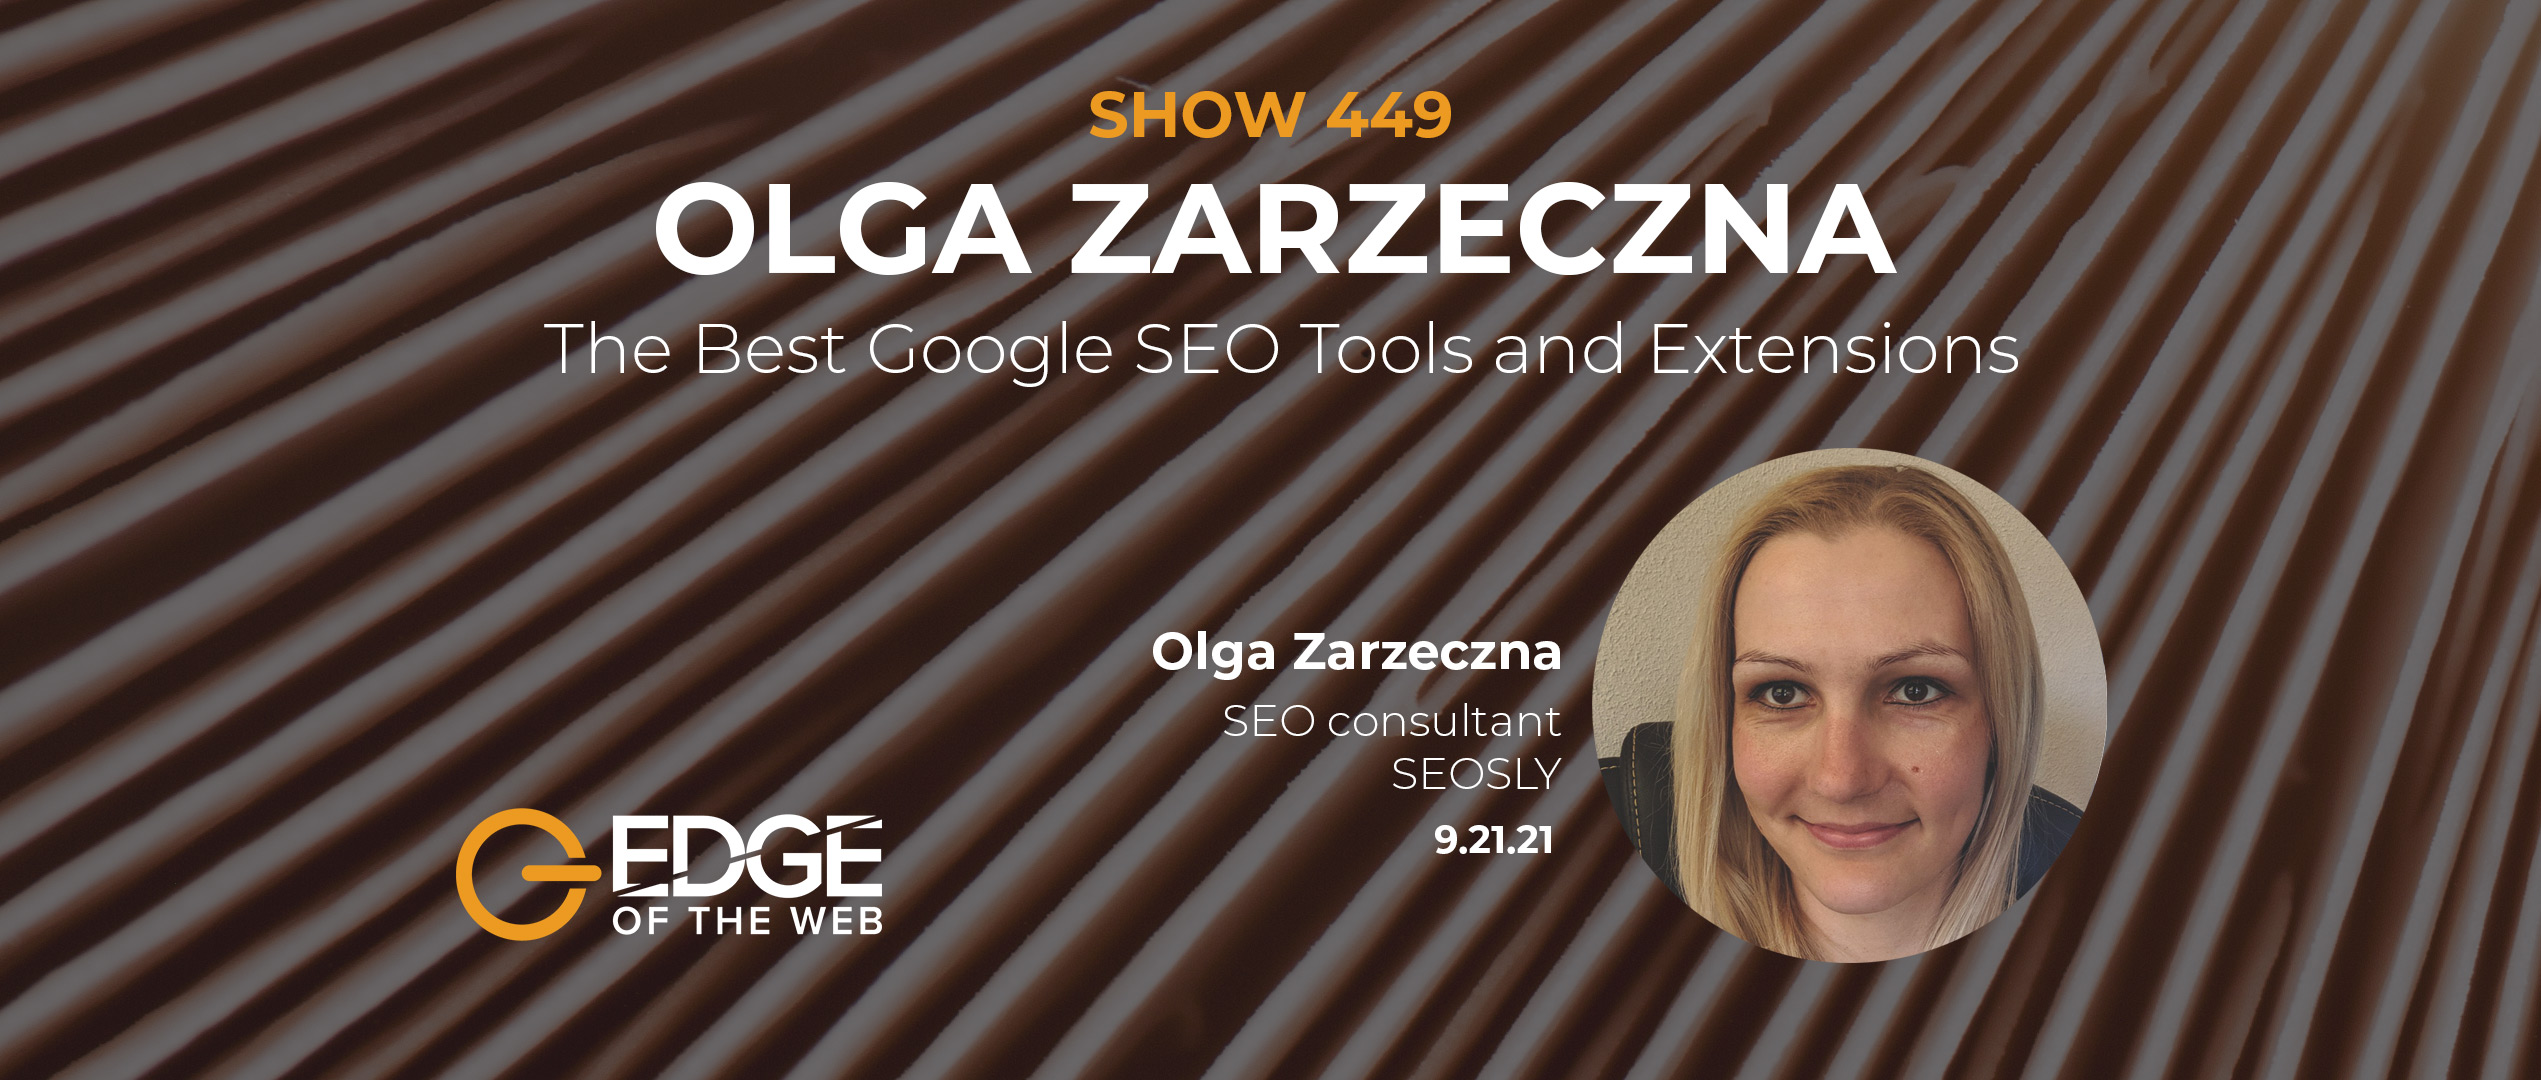 449 | The Best Google SEO Tools and Extensions with Olga Zarzeczna